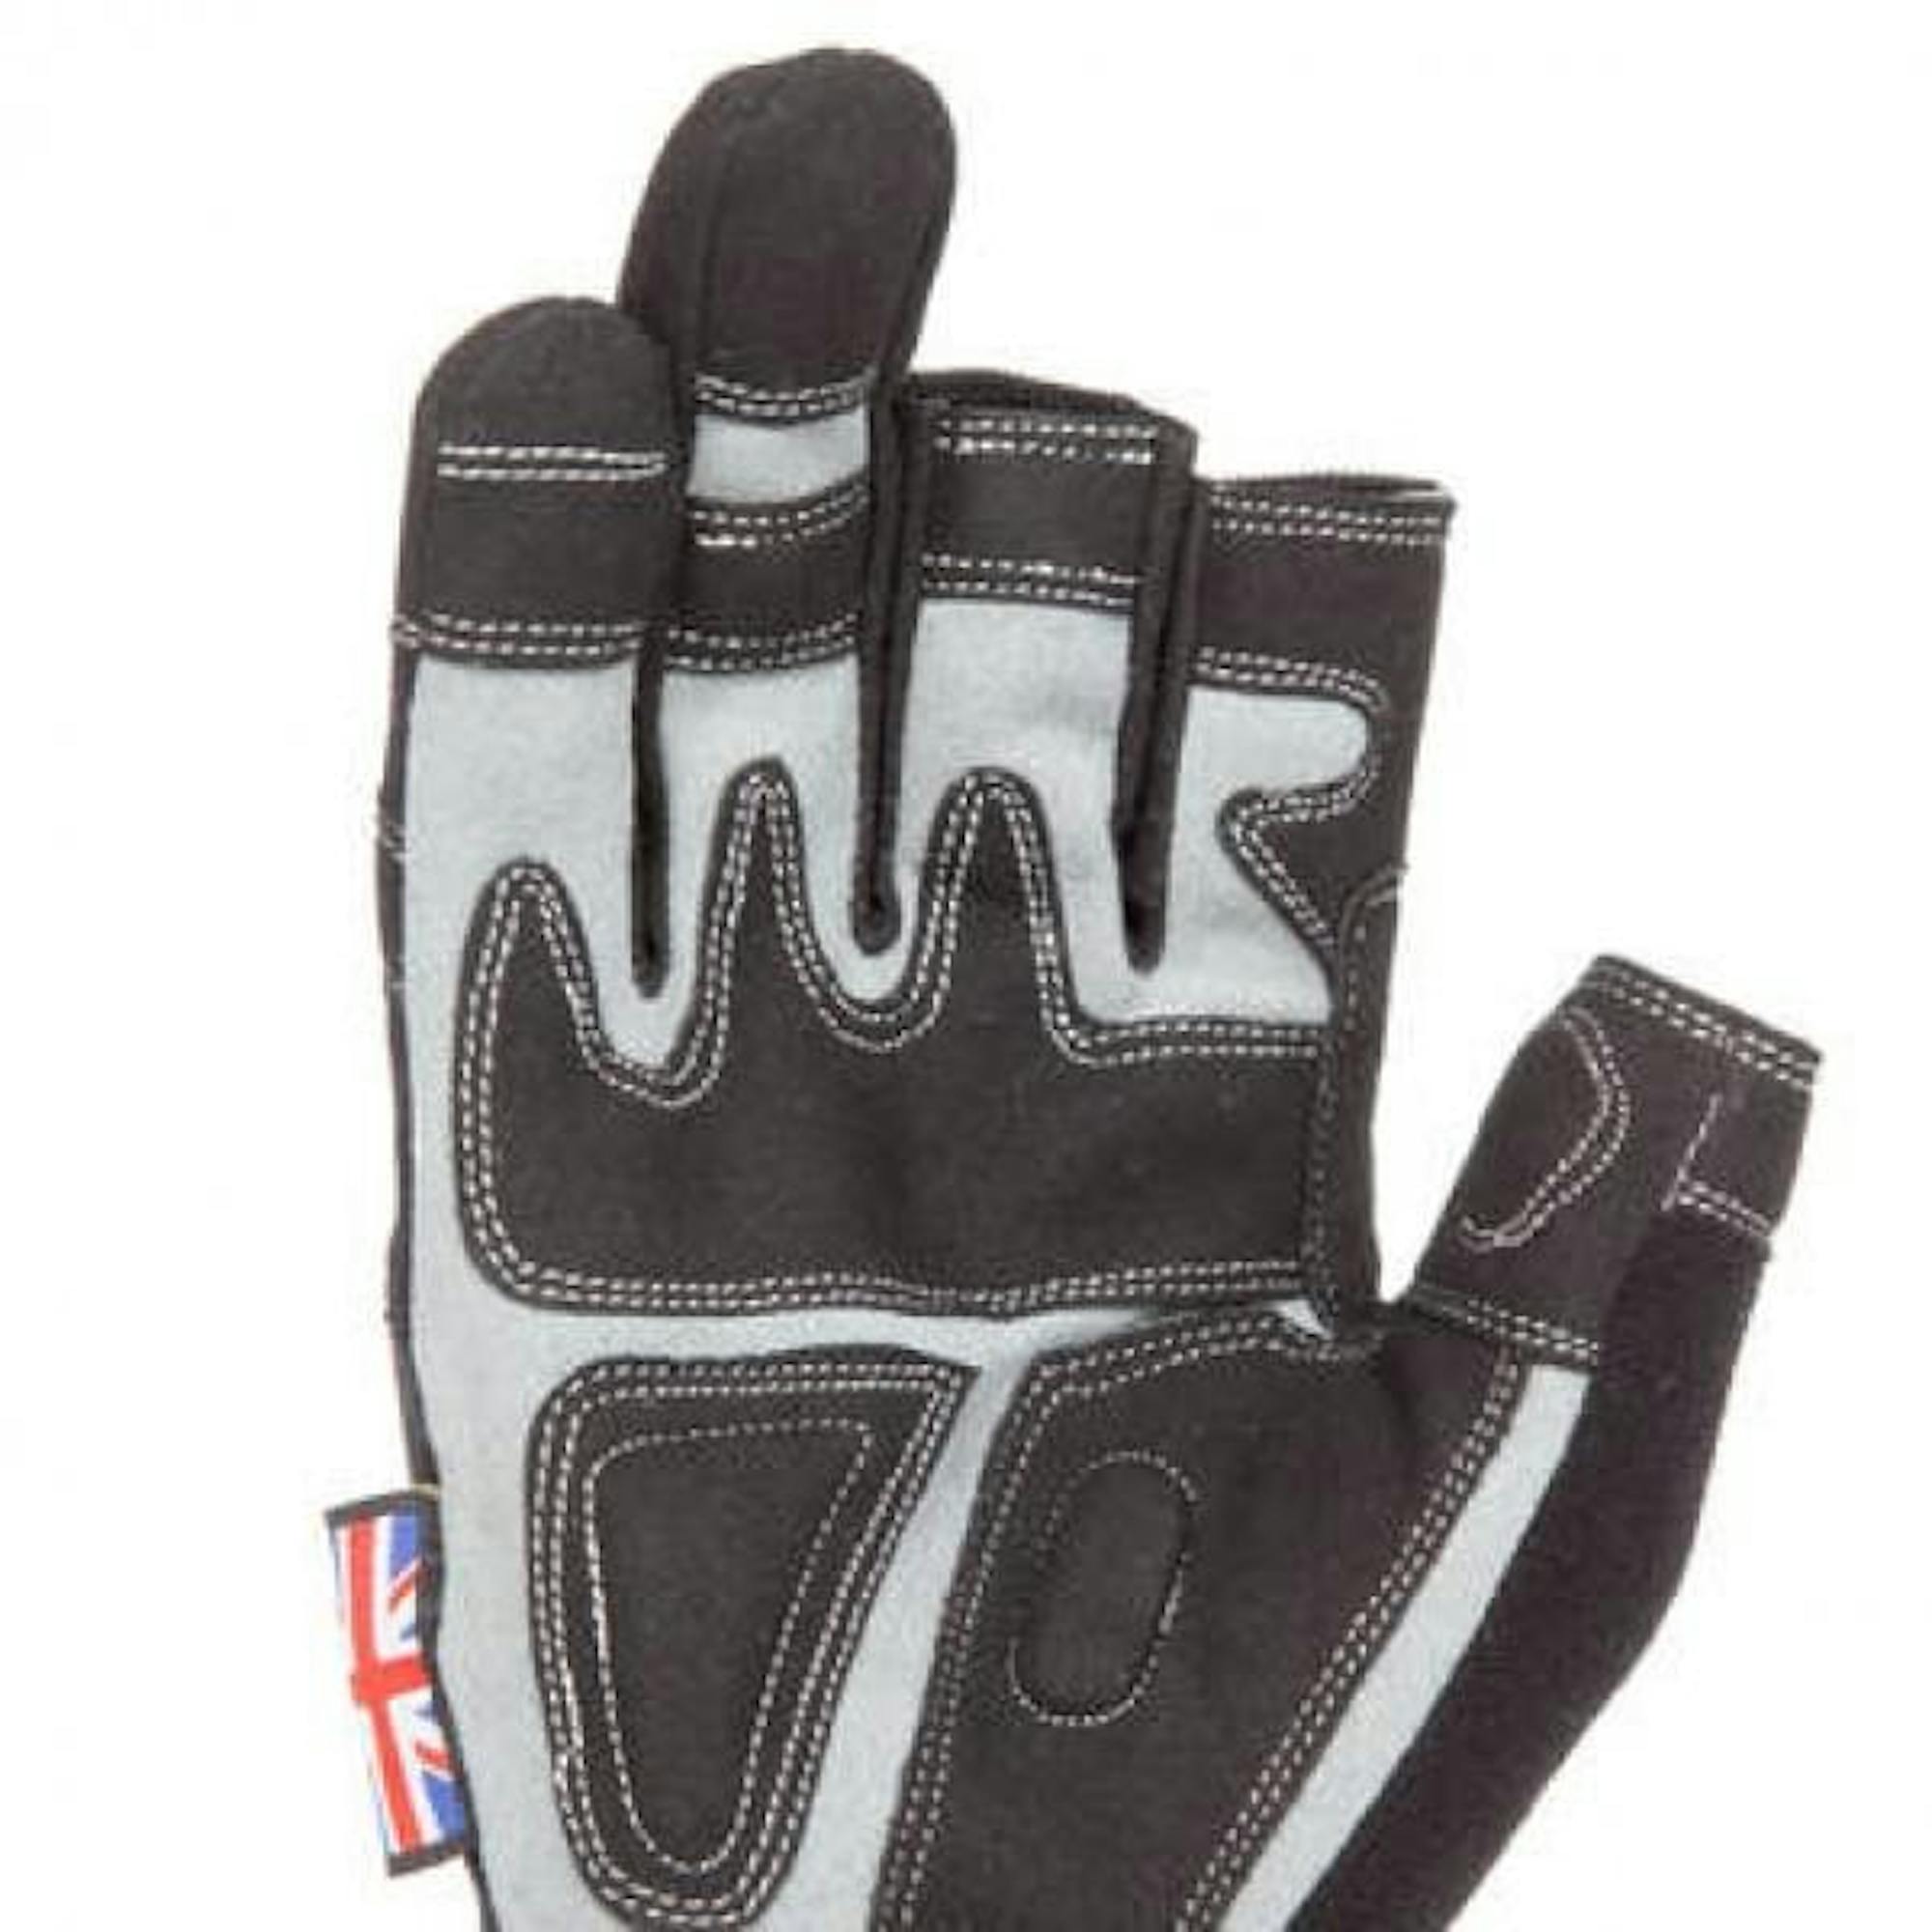 Comfort Fit Dirty Rigger gloves